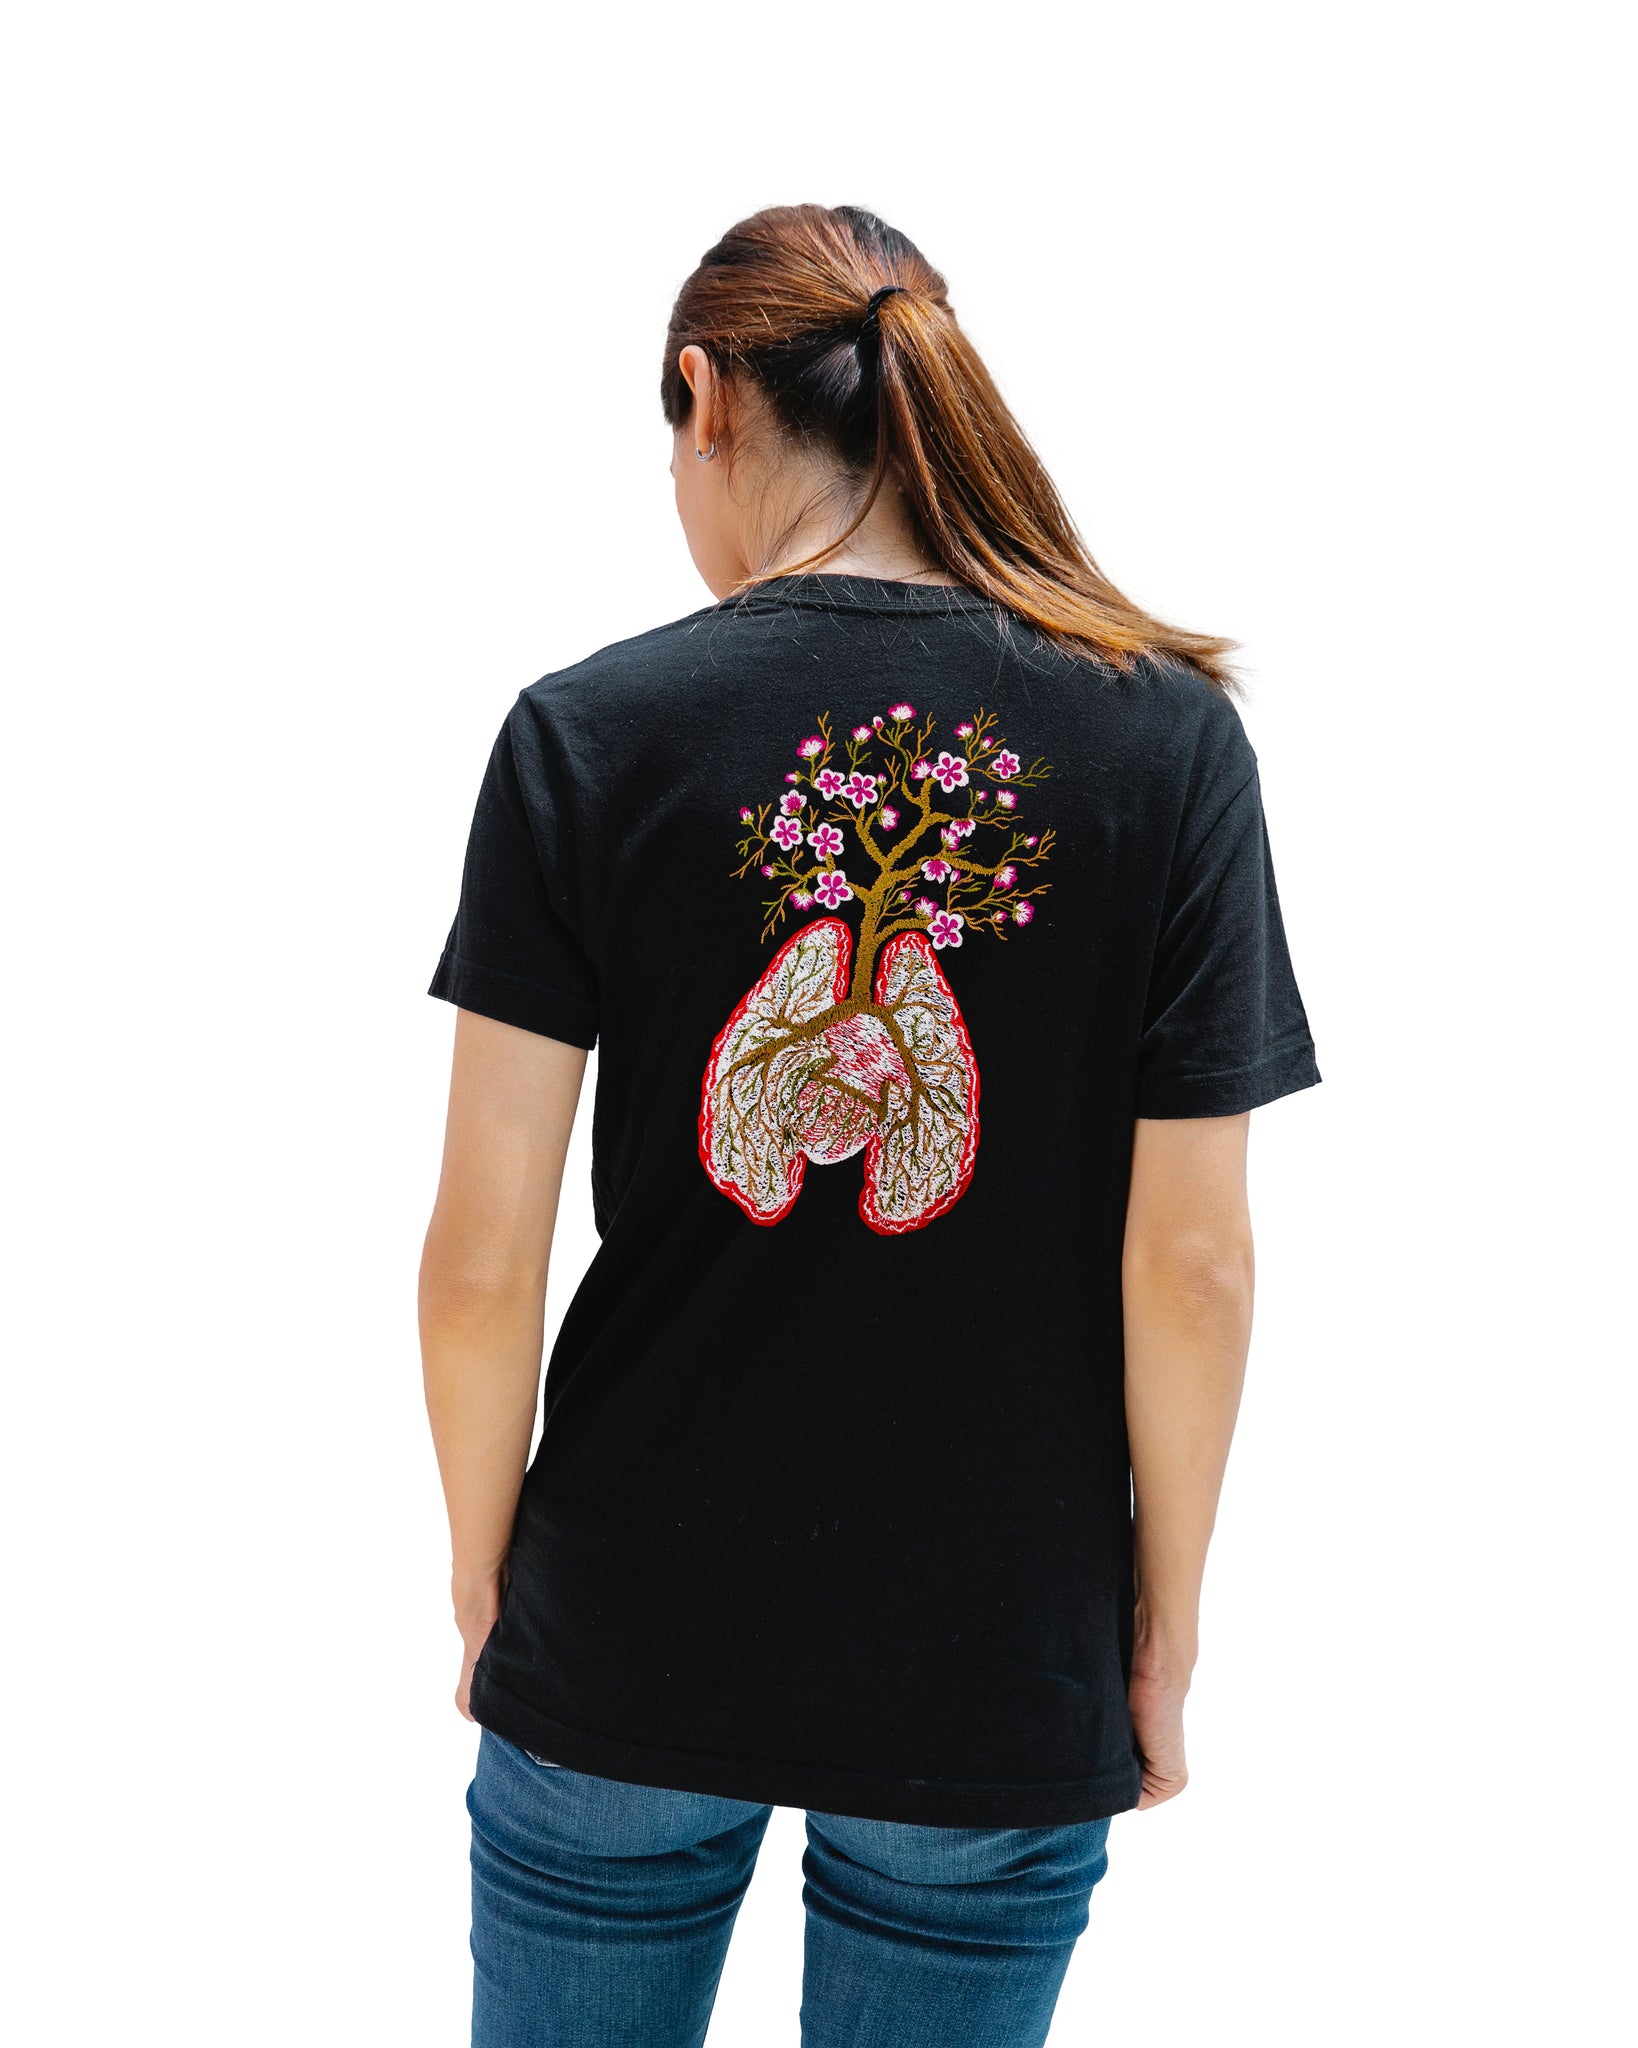 The Tree of Life Embroidered Artwork T-shirt For Women